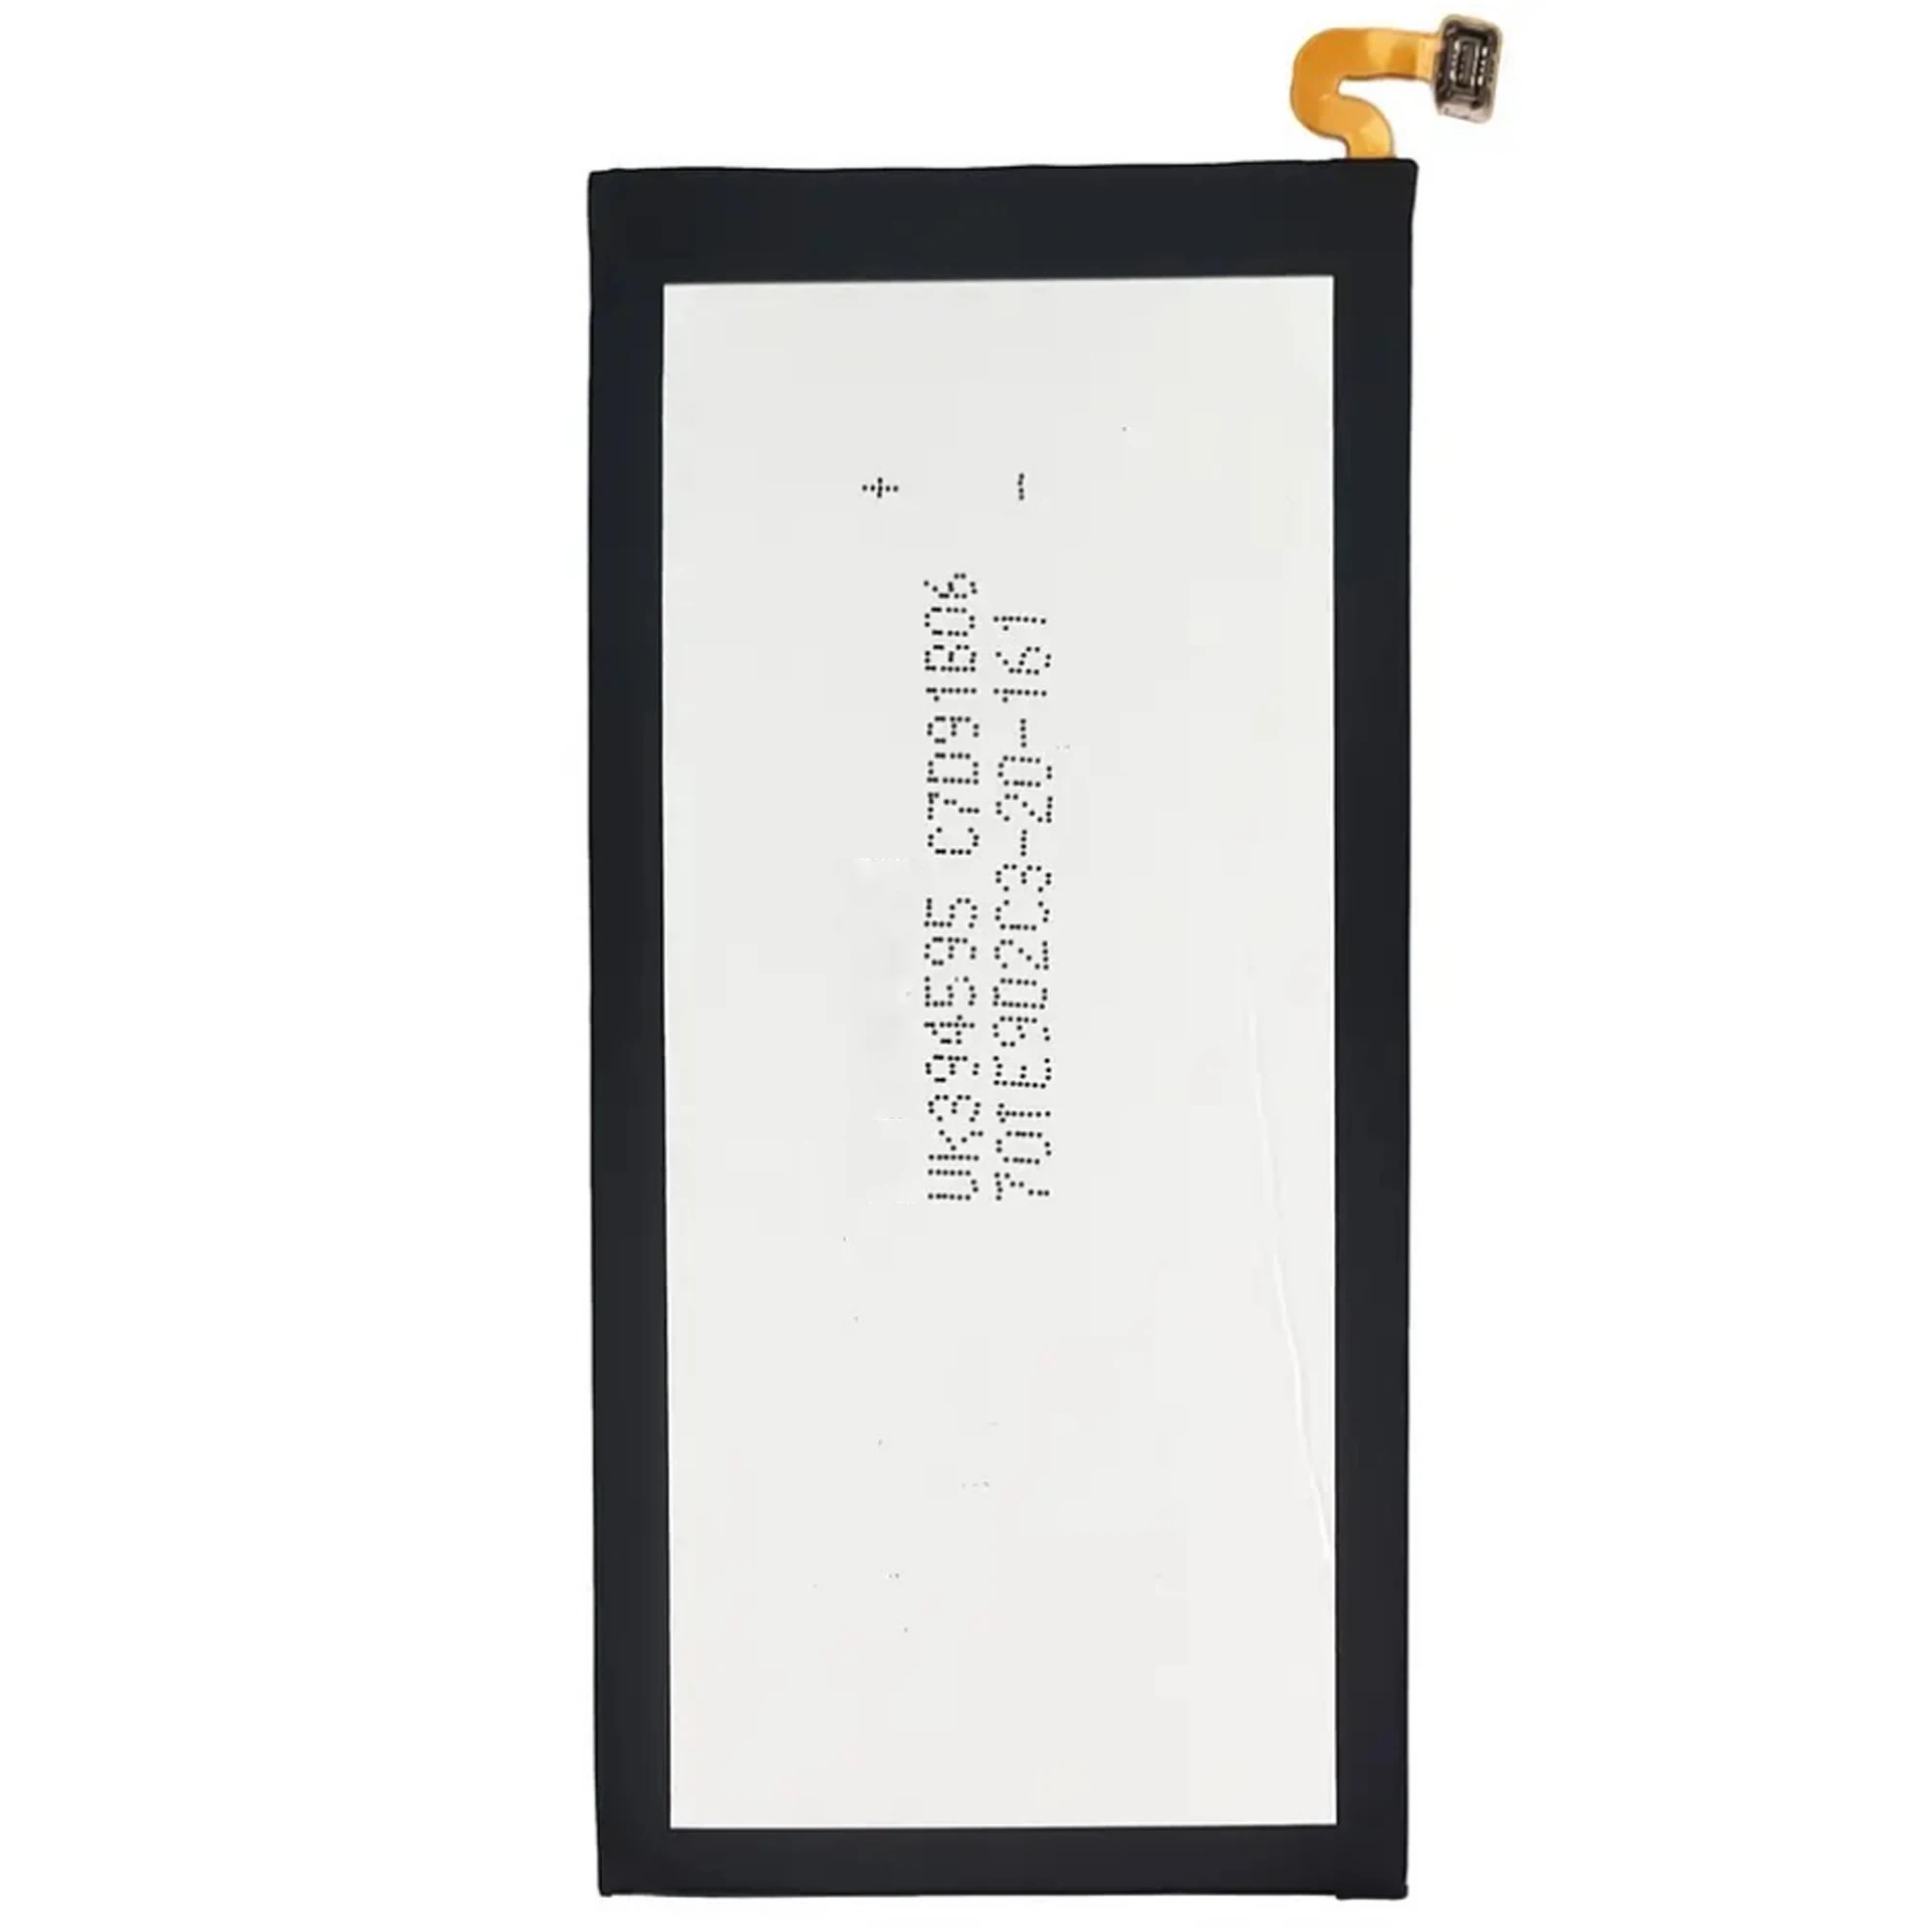 EB-BA700ABE Battery For Samsung Galaxy A7 2015 A700FD SM-A700 A7000 A7009 Original Capacity Mobile Phone Replace High Capacity B enlarge